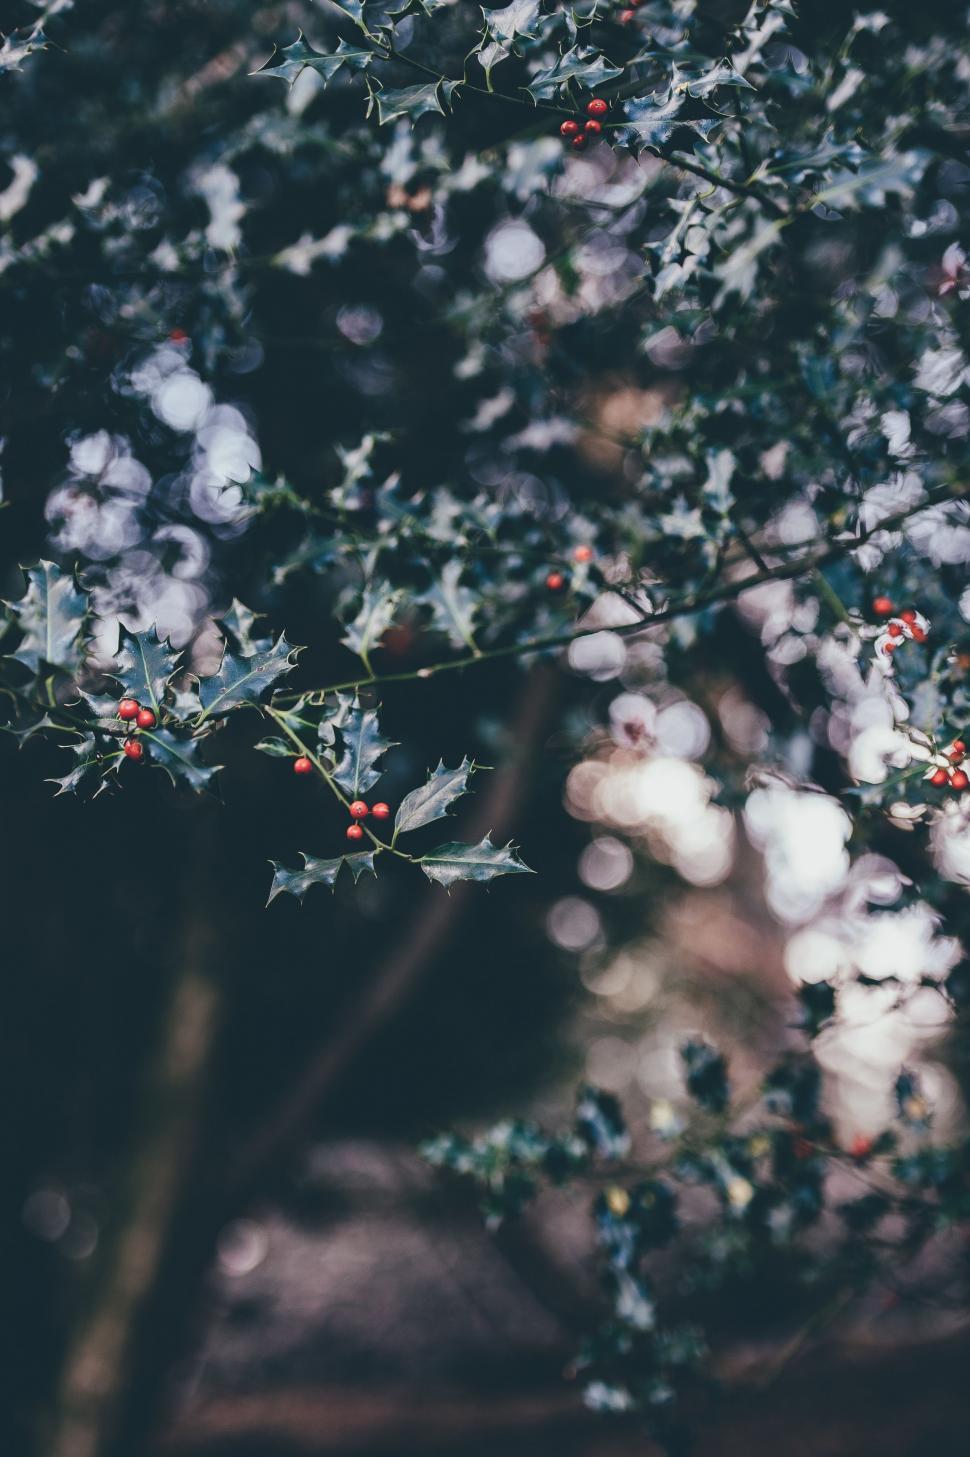 Free Image of Close Up of a Tree With Berries 